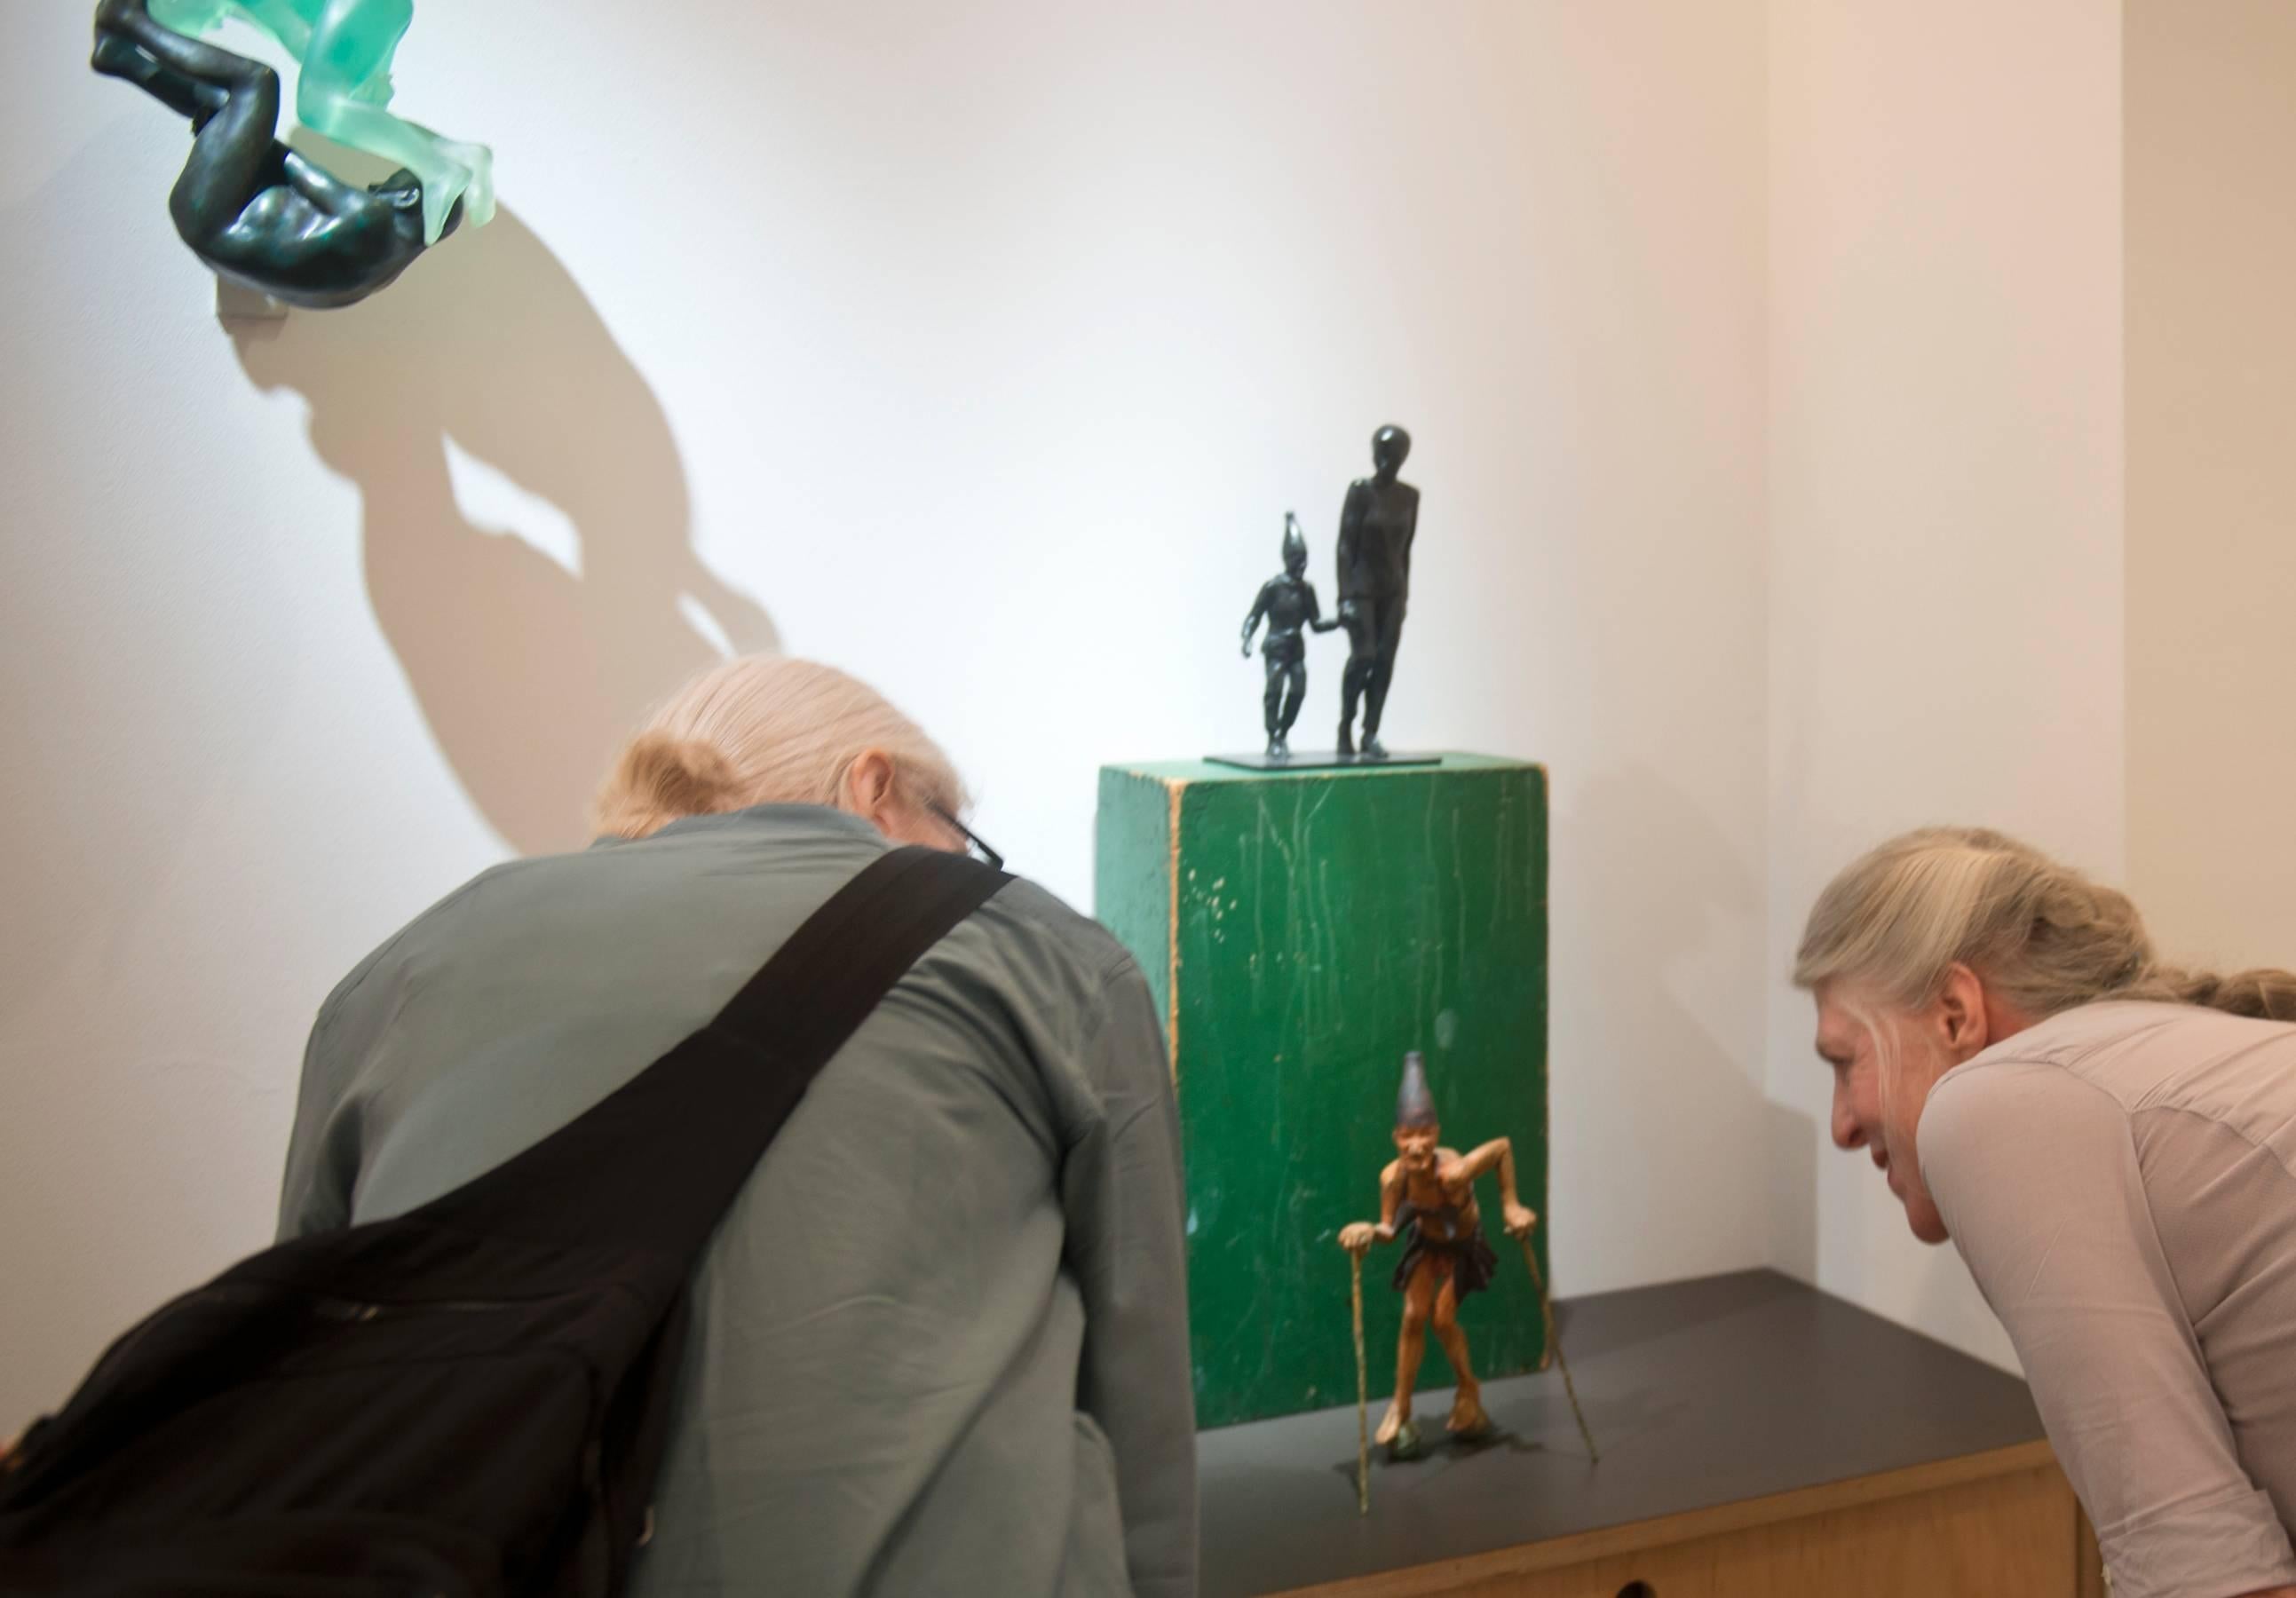 Young Punch Goes Shopping with His Mother - Modern Sculpture by Robert Taplin